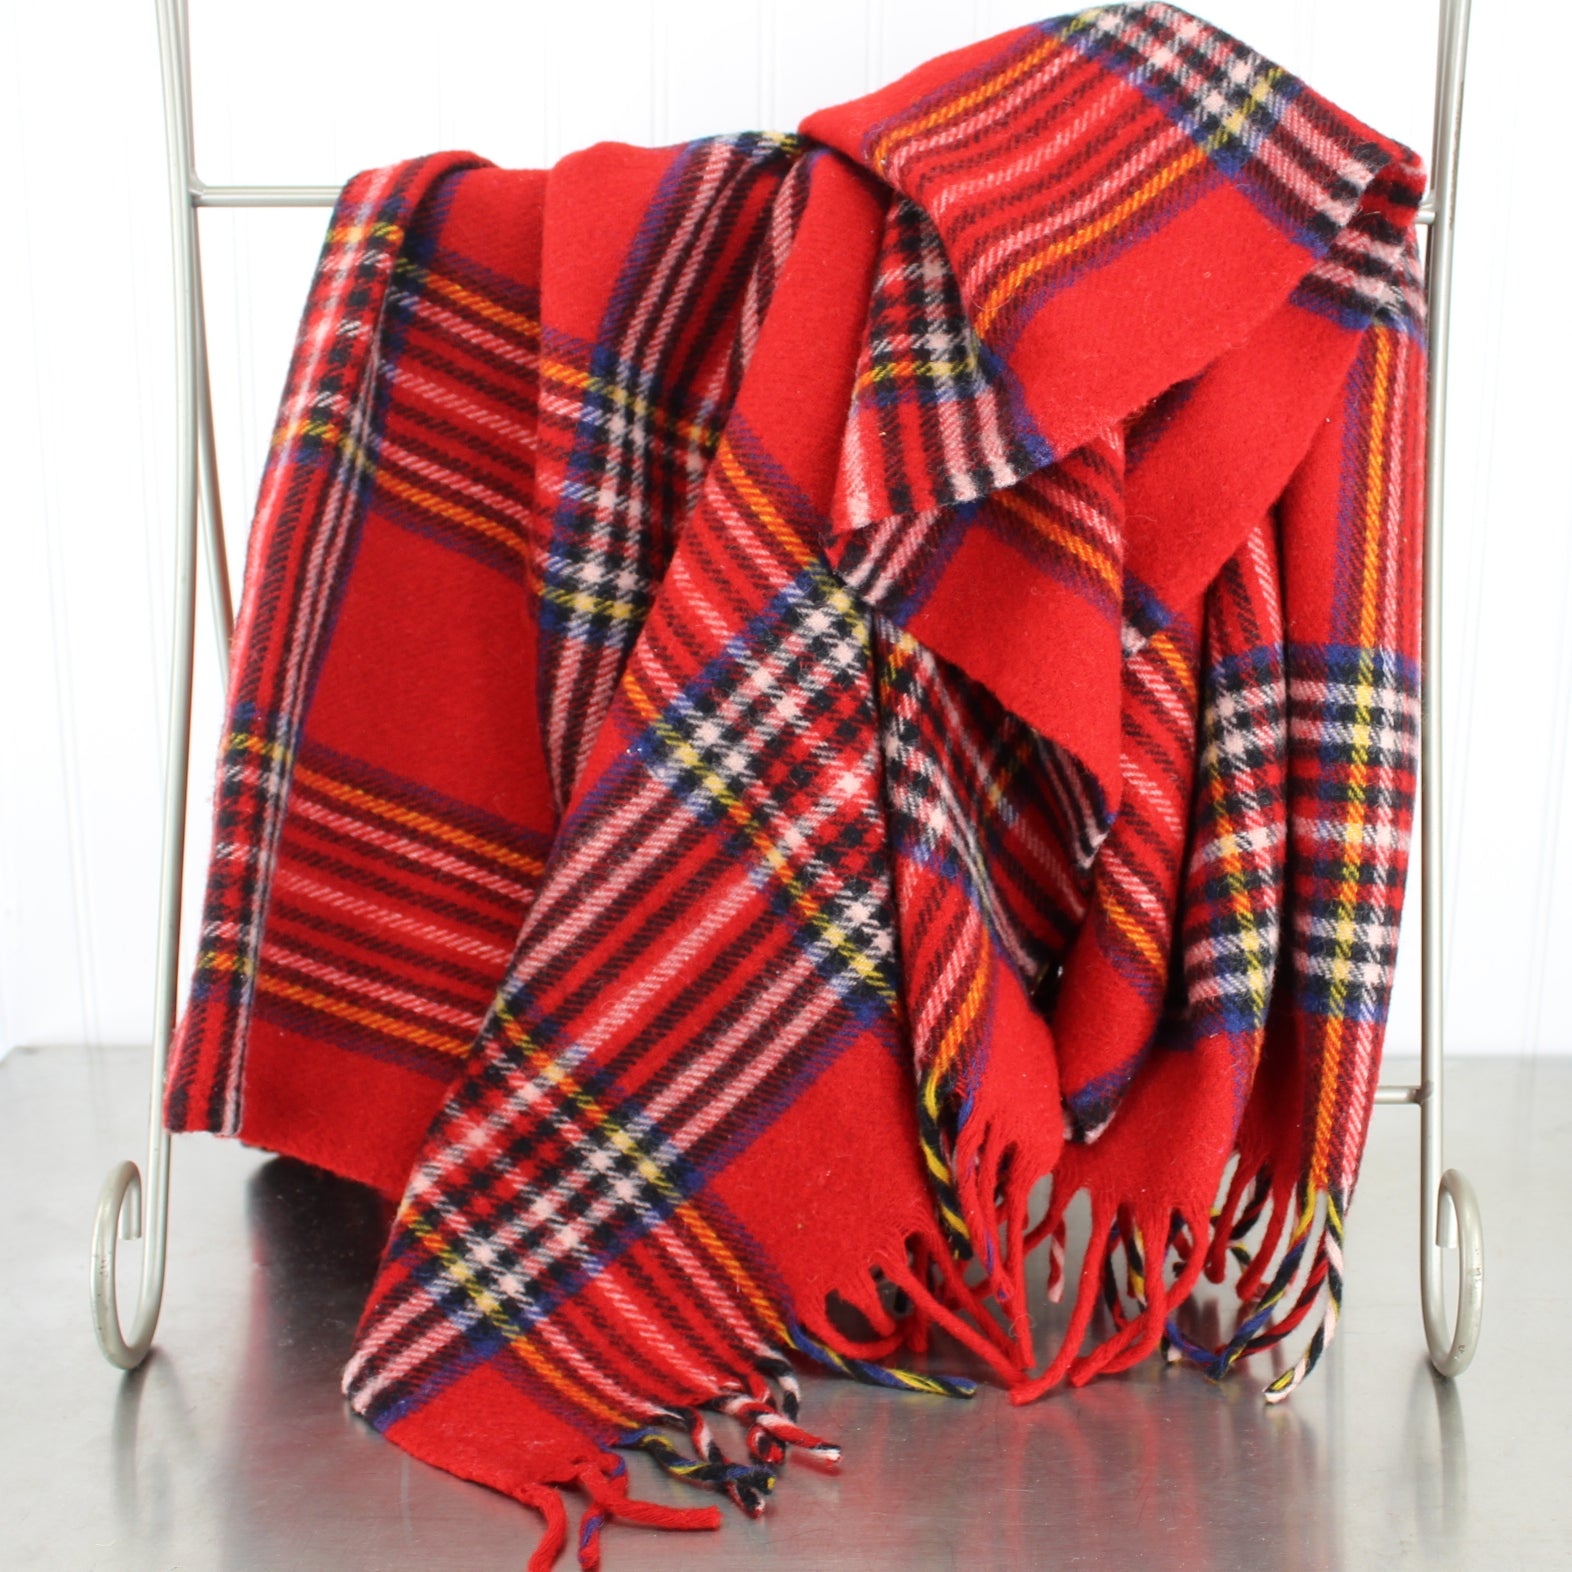 Faribo Classic Wool Throw Blanket Red Plaid - 54" by 50" USA